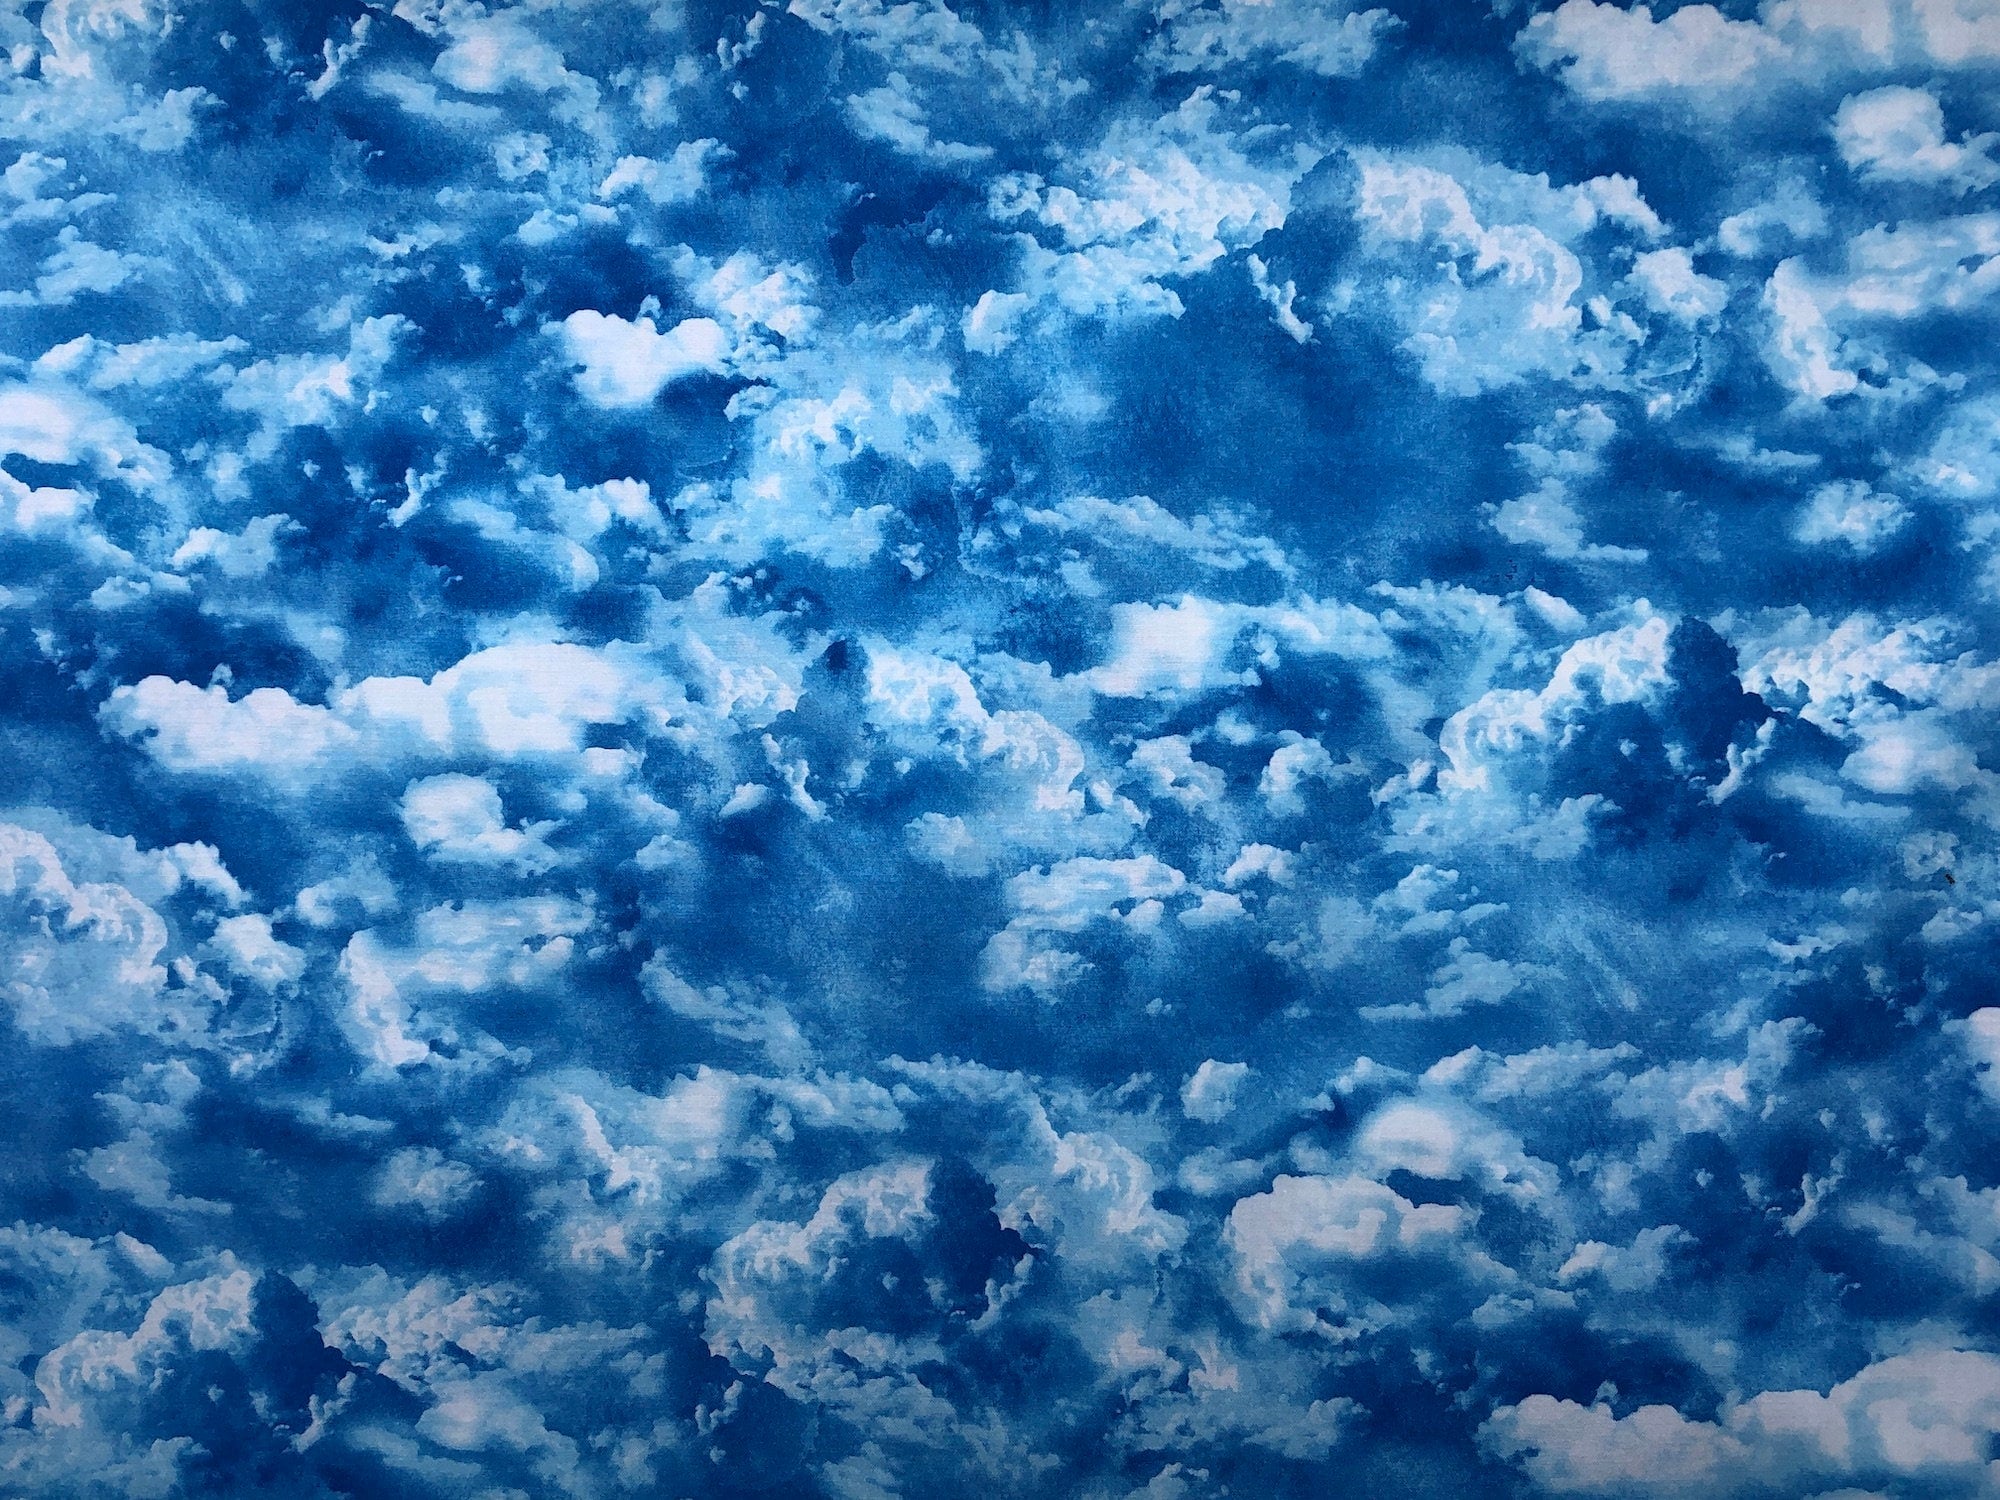 This fabric is covered with blue and white clouds.